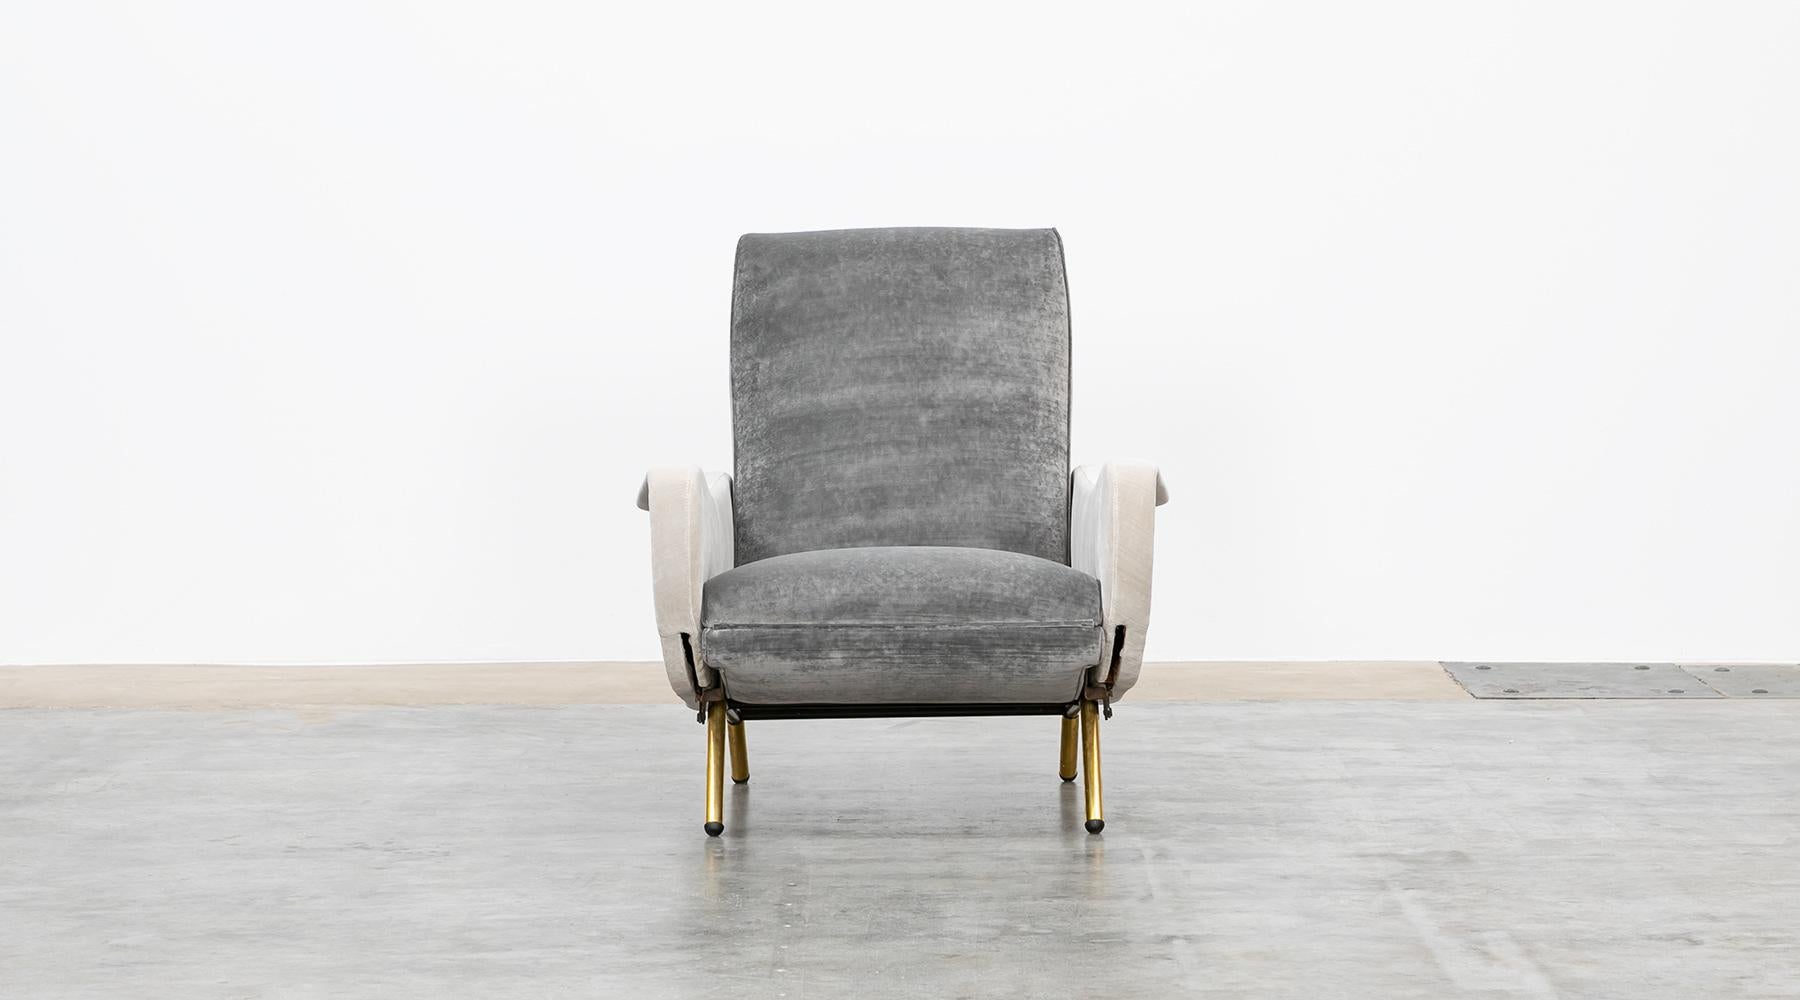 Italian 1950s New Upholstery in Grey, Brass Legs, Pair of Lounge Chairs by Marco Zanuso